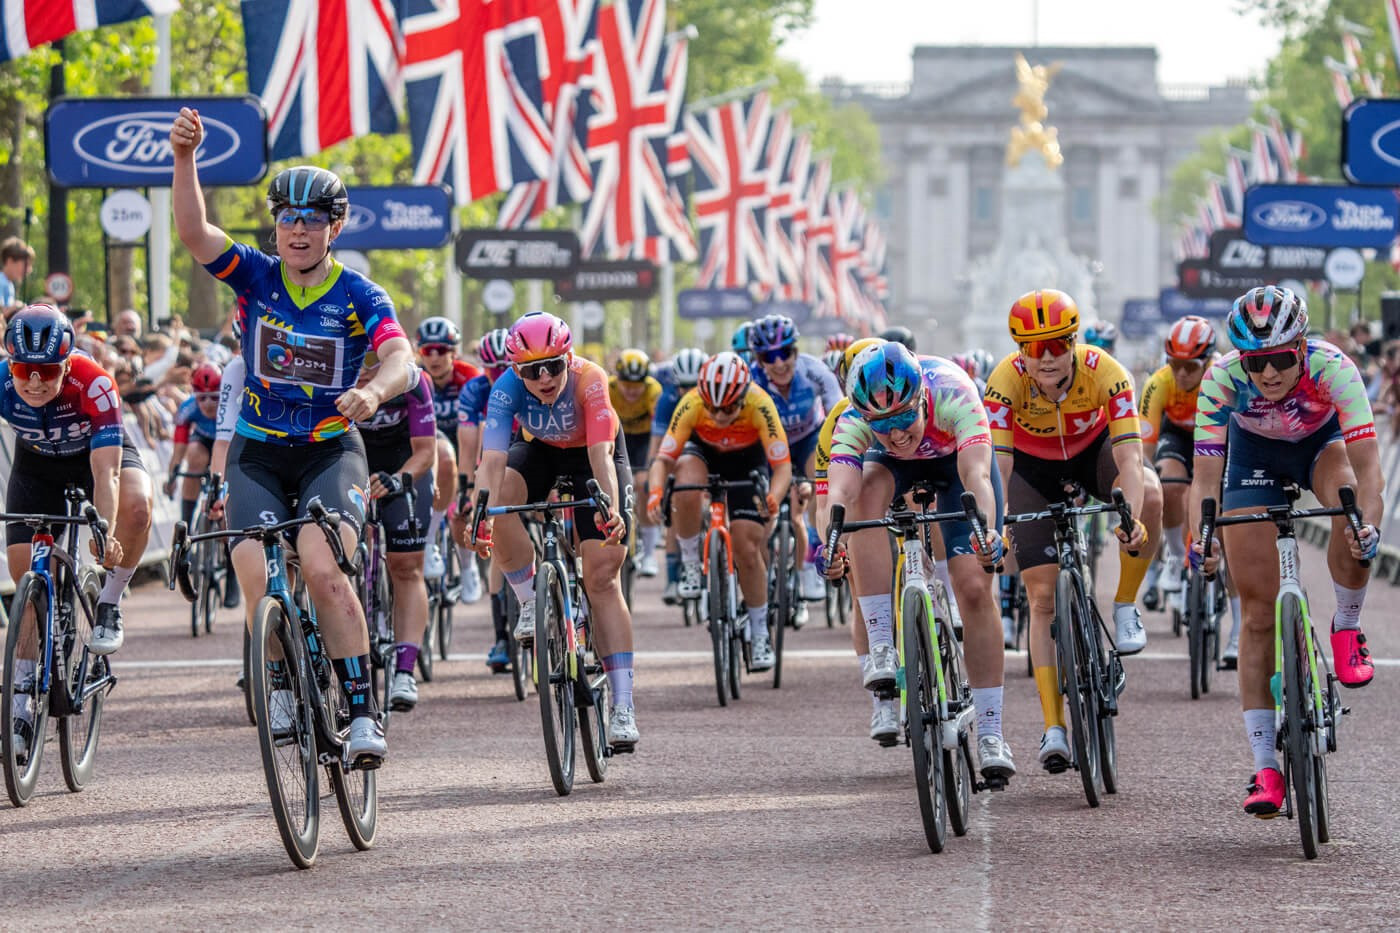 The Netherlands Charlotte Kool won the UCI Women's World Tour event RideLondon Classique after a sprint finish on The Mall ©RideLondon